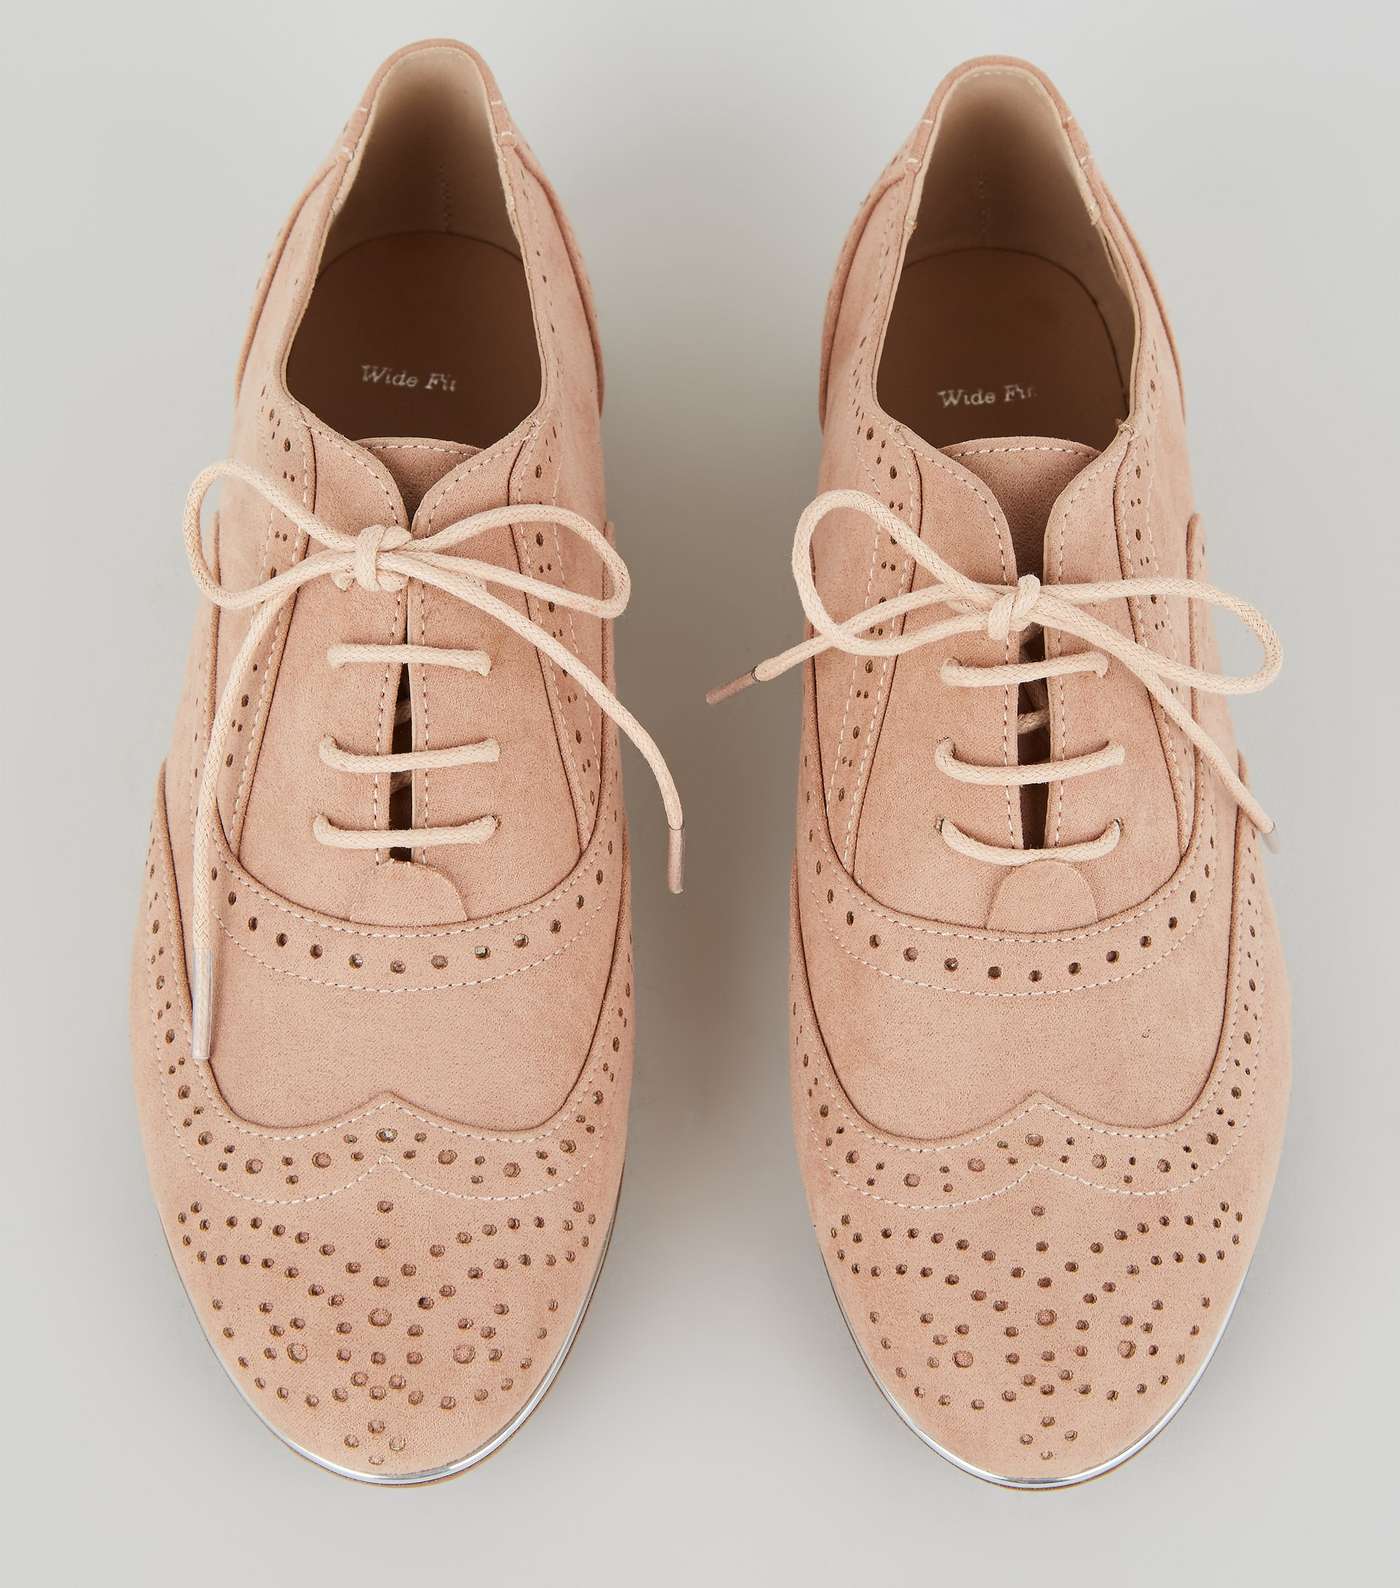 Wide Fit Nude Suedette Piped Edge Brogues Image 3